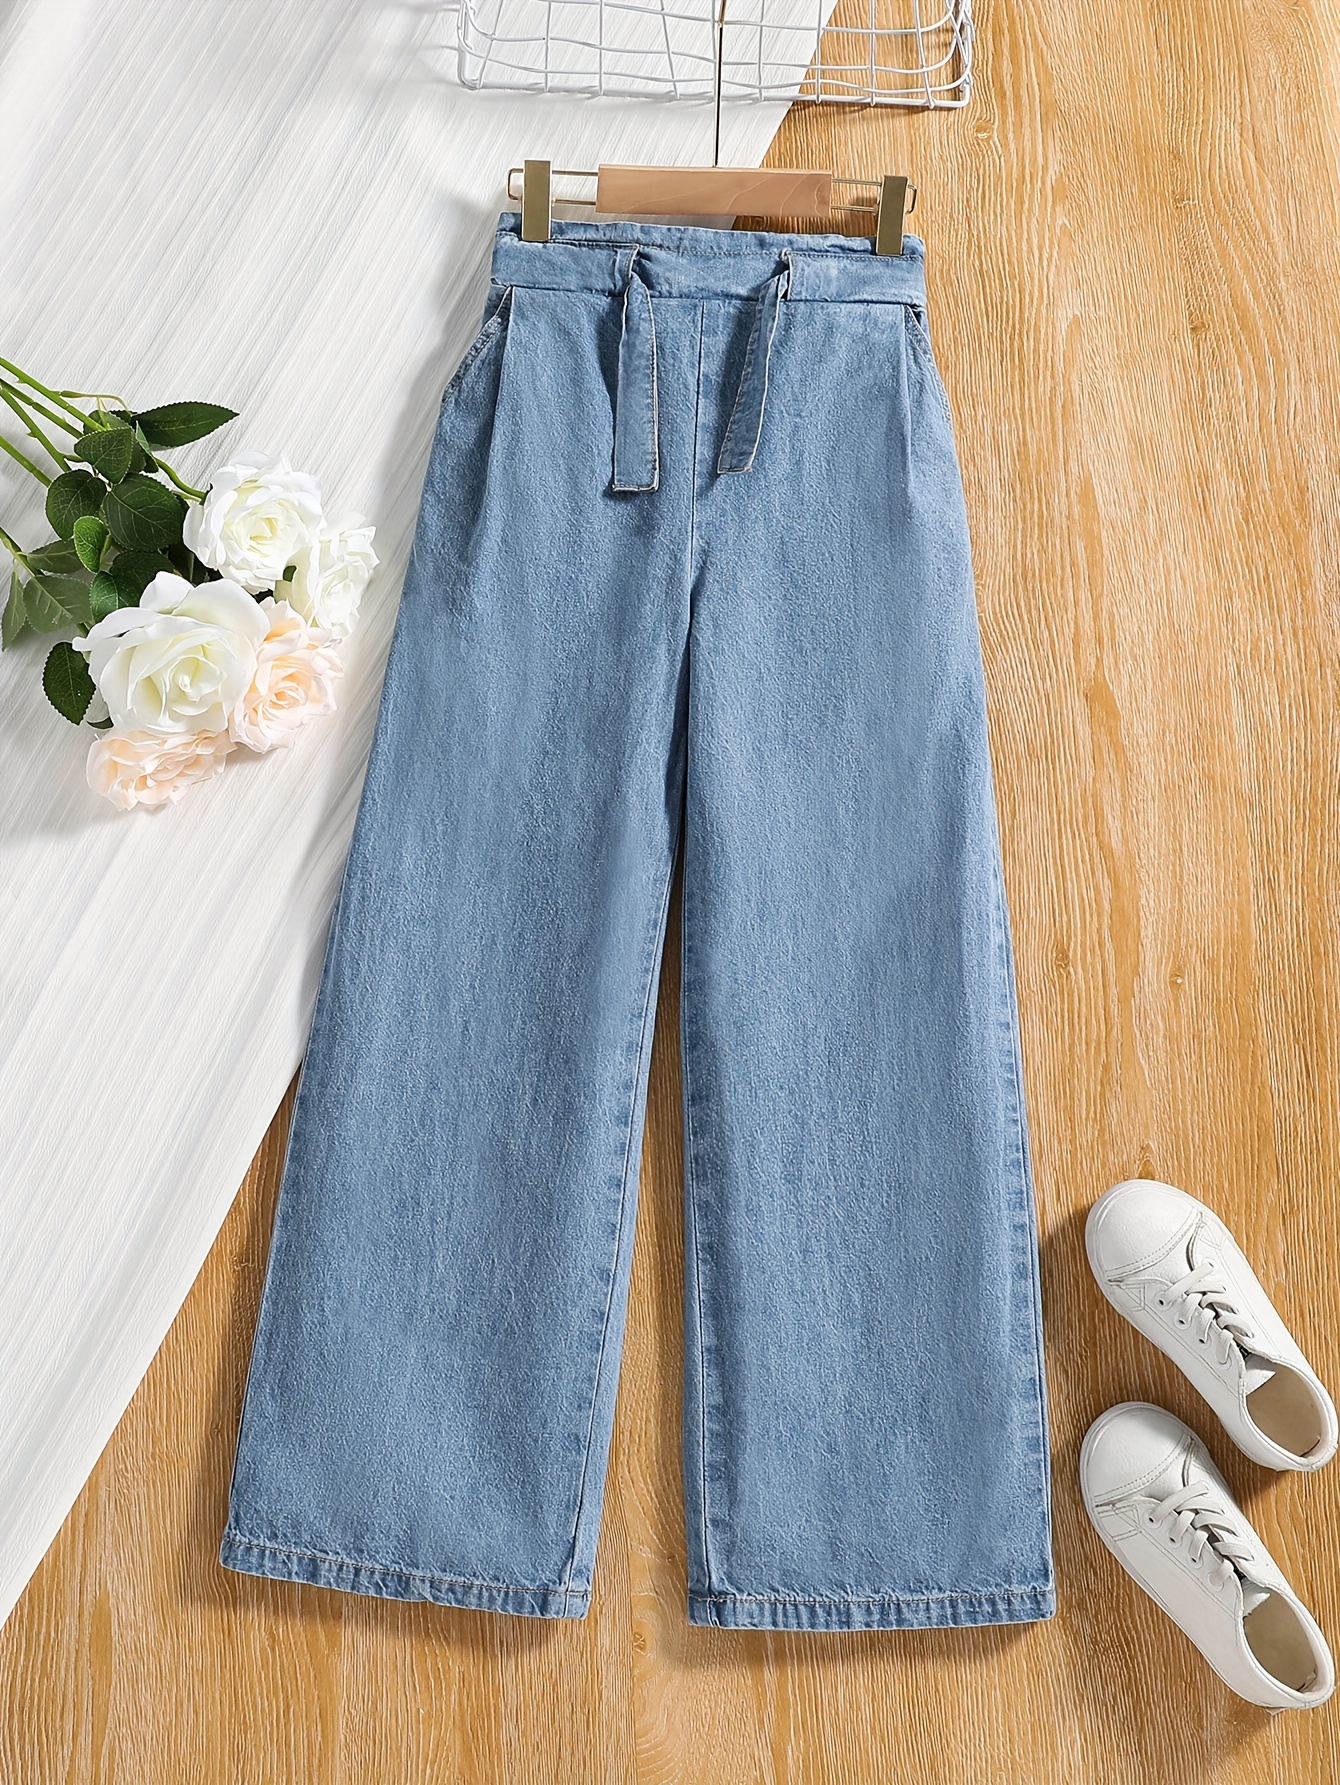 Summer Teen Girls Jeans Blue High Waist Slim Denim Pants For Girls Kids  Trousers Casual Children Clothes For 10 12 Years